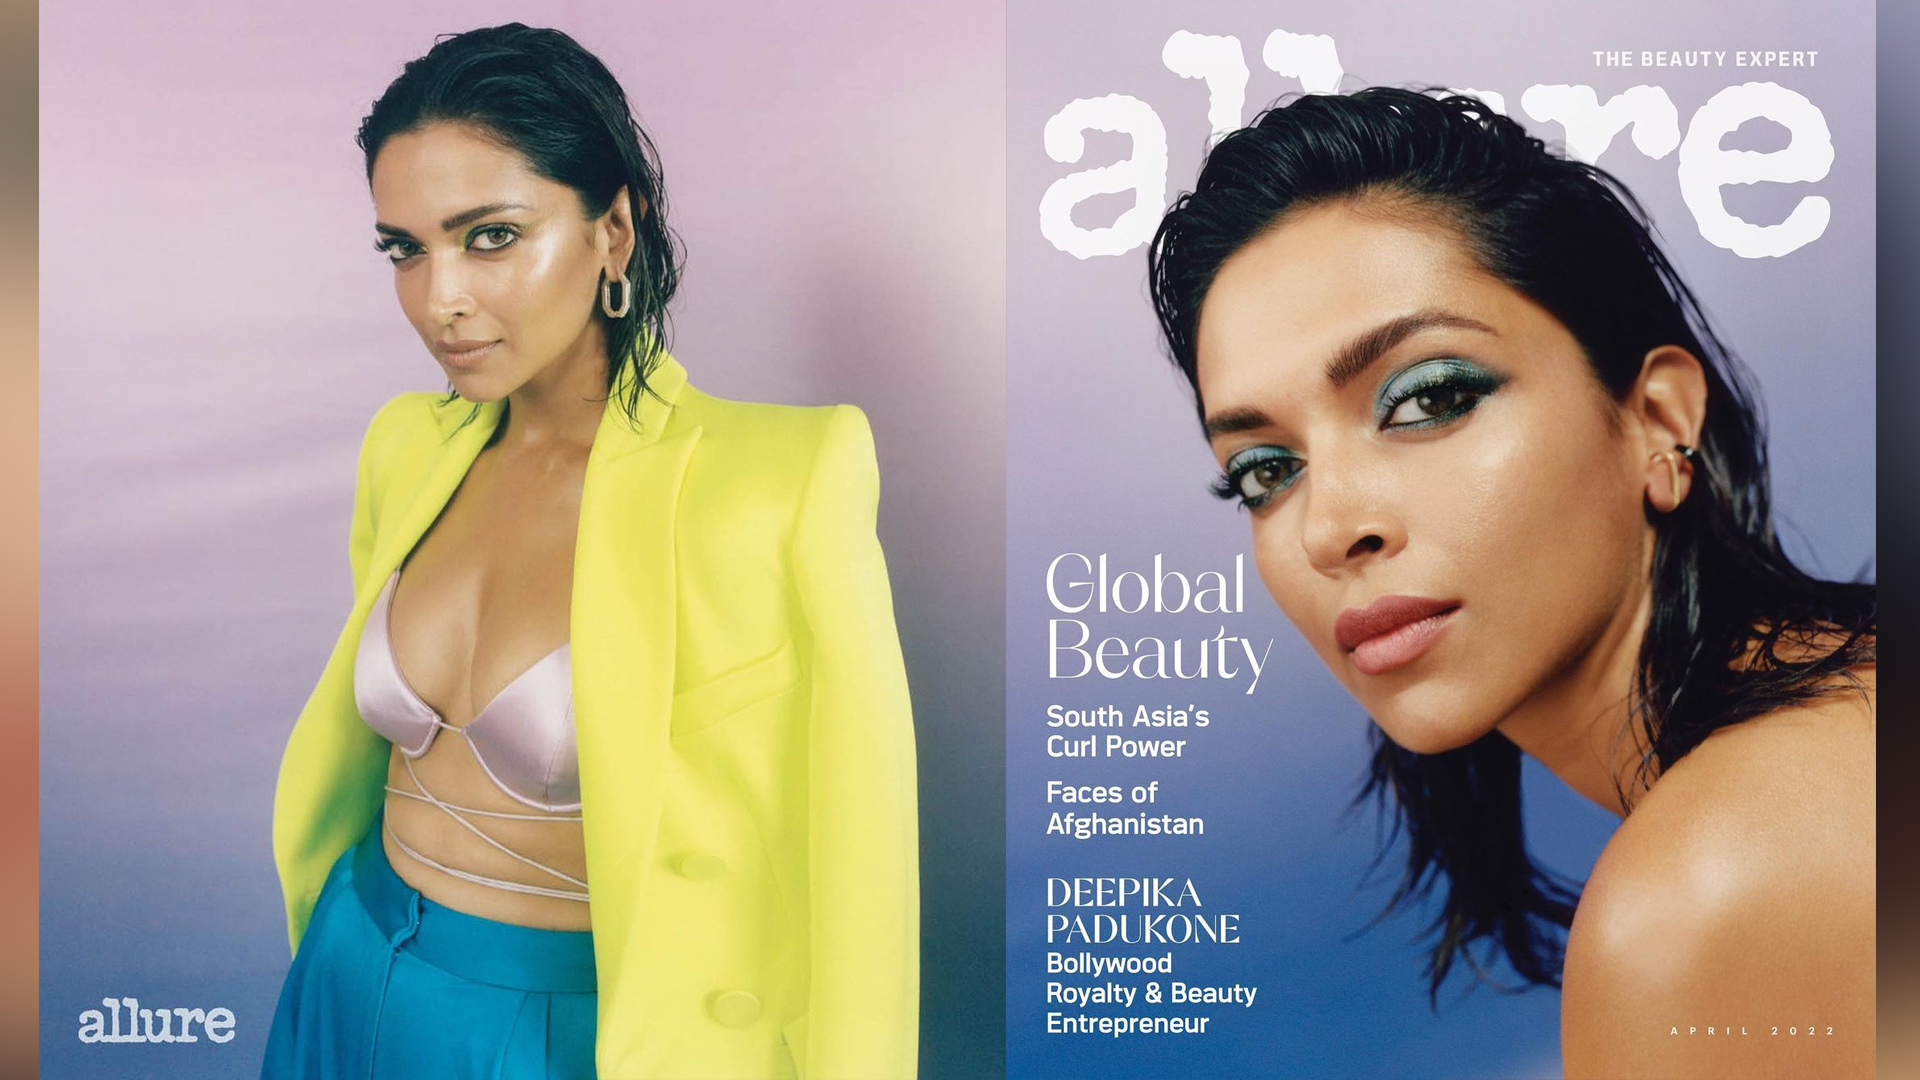 Deepika Padukone graces the cover for a leading international magazine; recounts her journey so far!